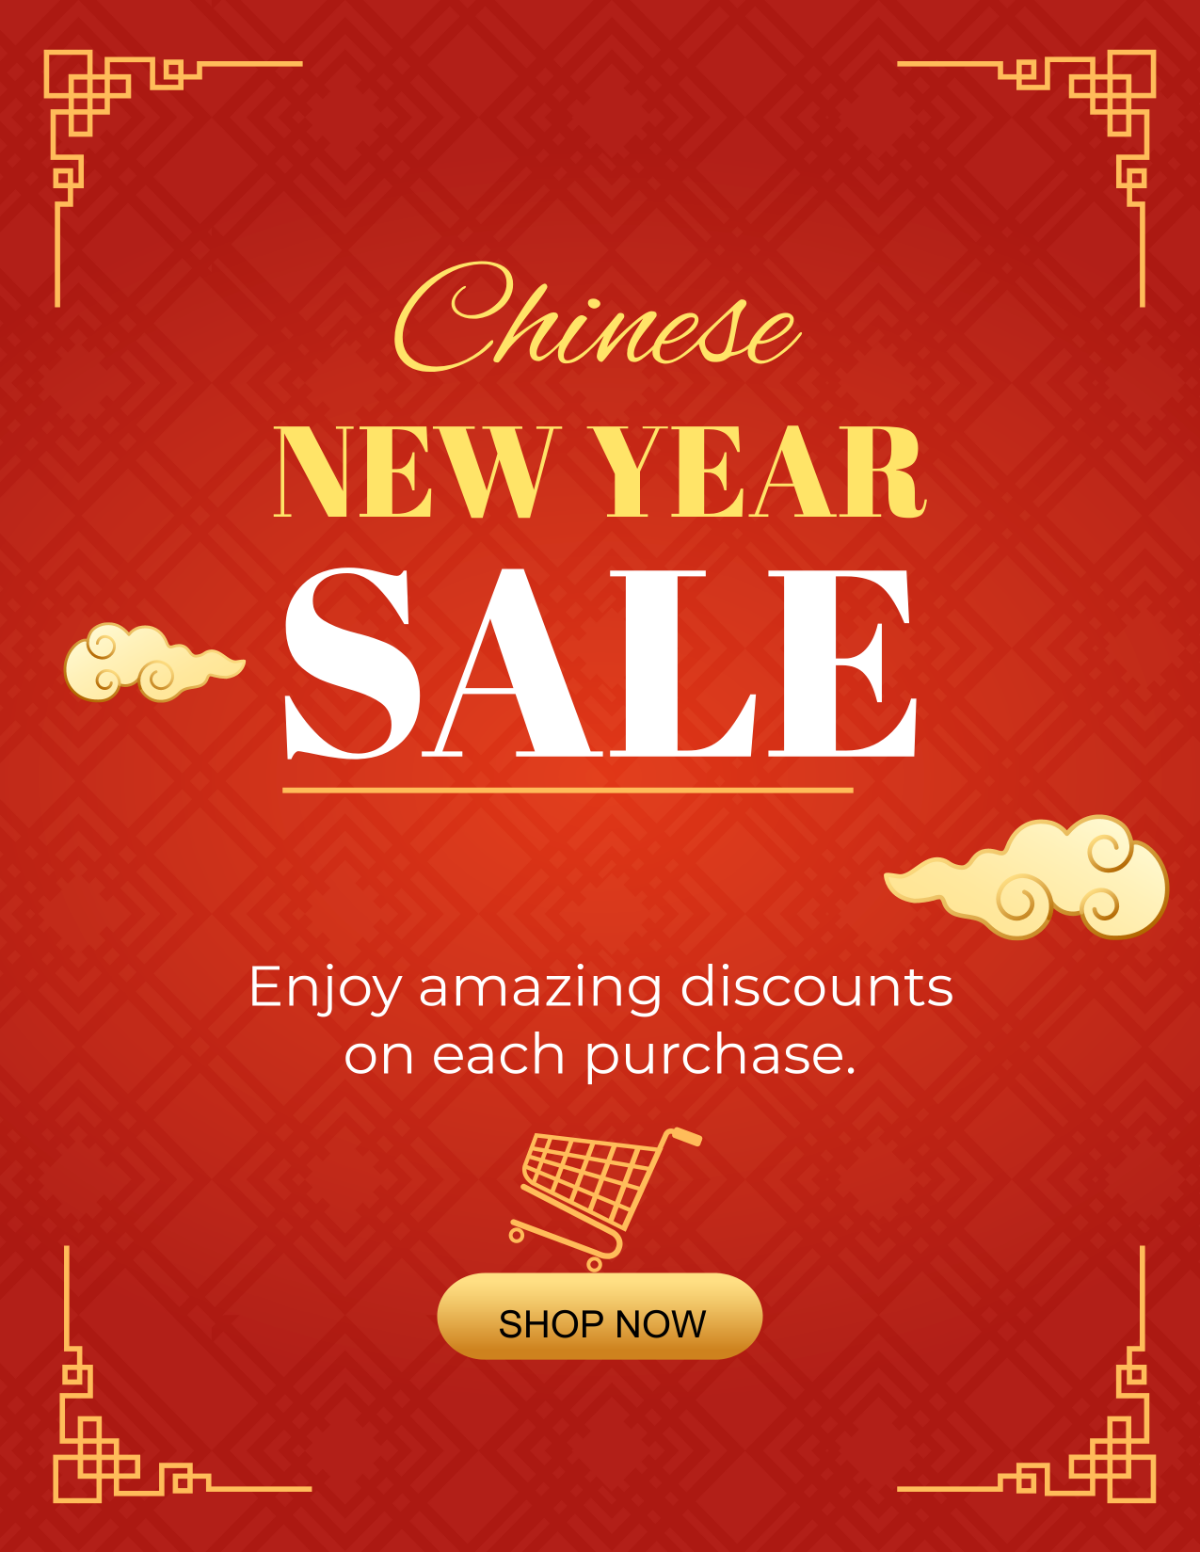 Chinese New Year Promotion Flyer Template